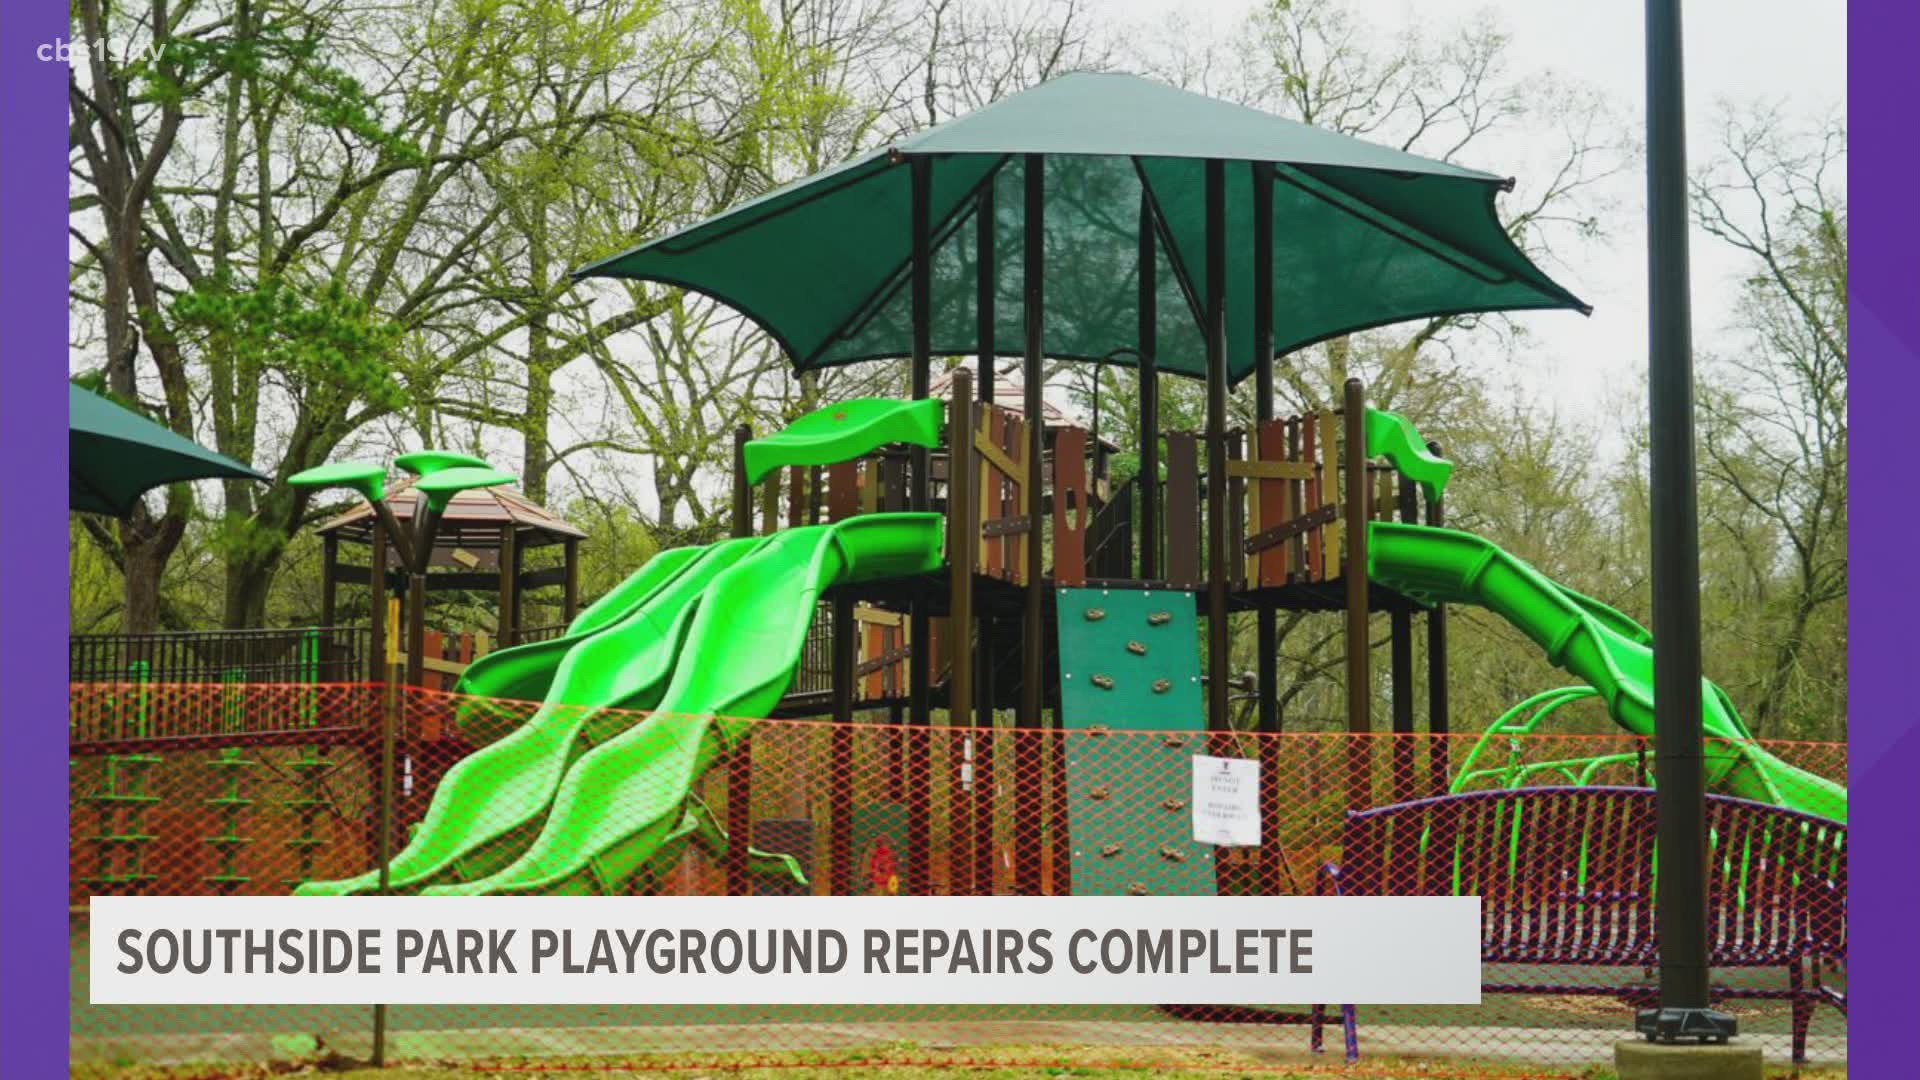 The new playground is located at 455 Shiloh Road in Tyler.